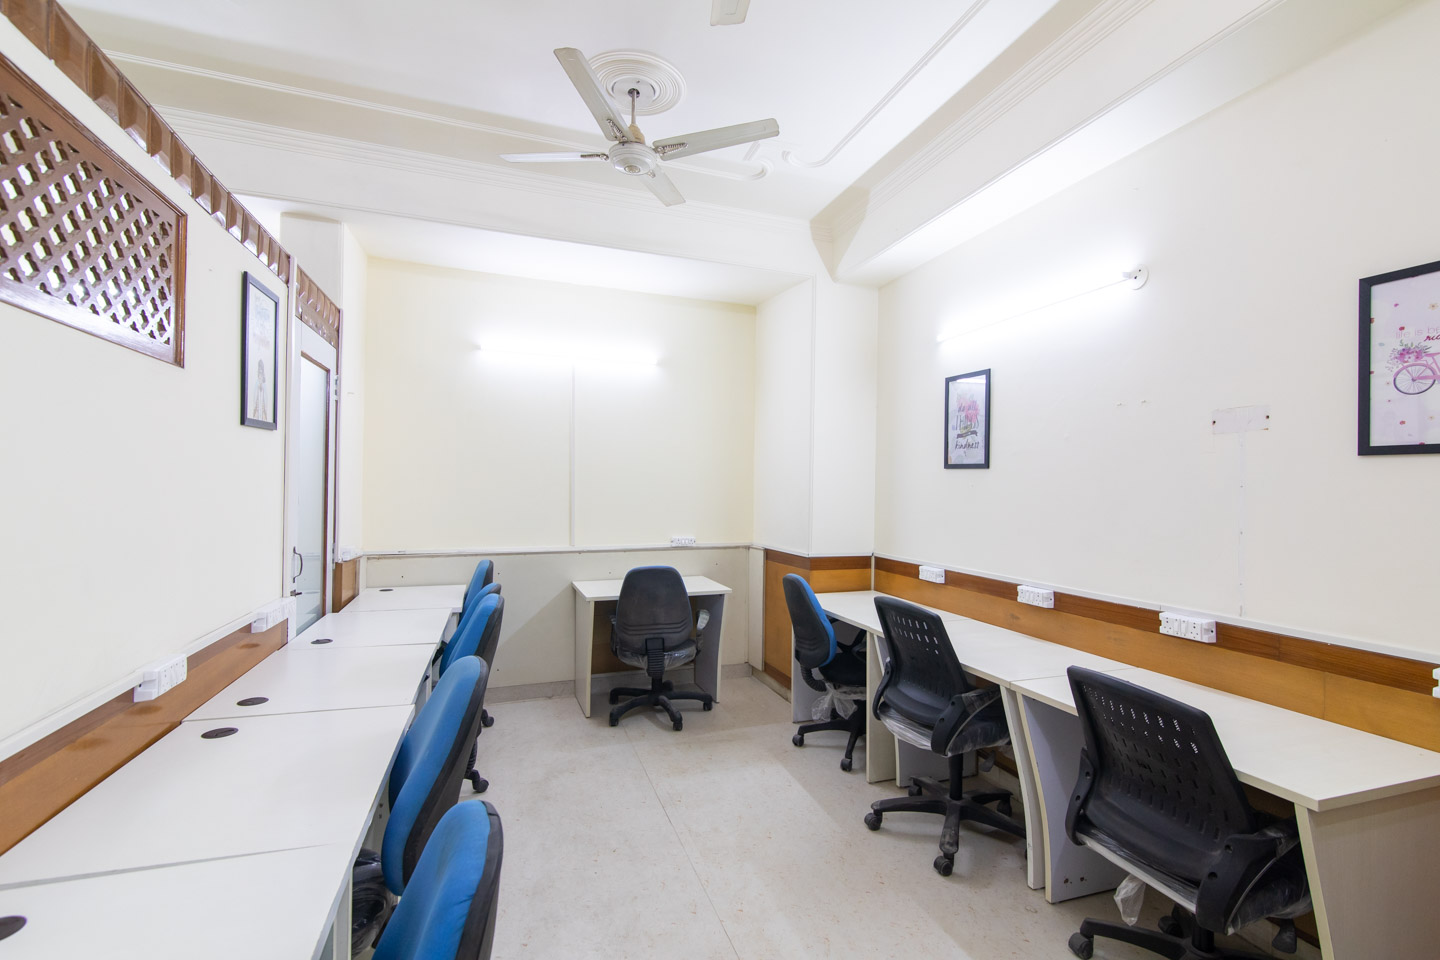 Thrive coworking Nirman Vihar - Coworking Space and Shared Office Space